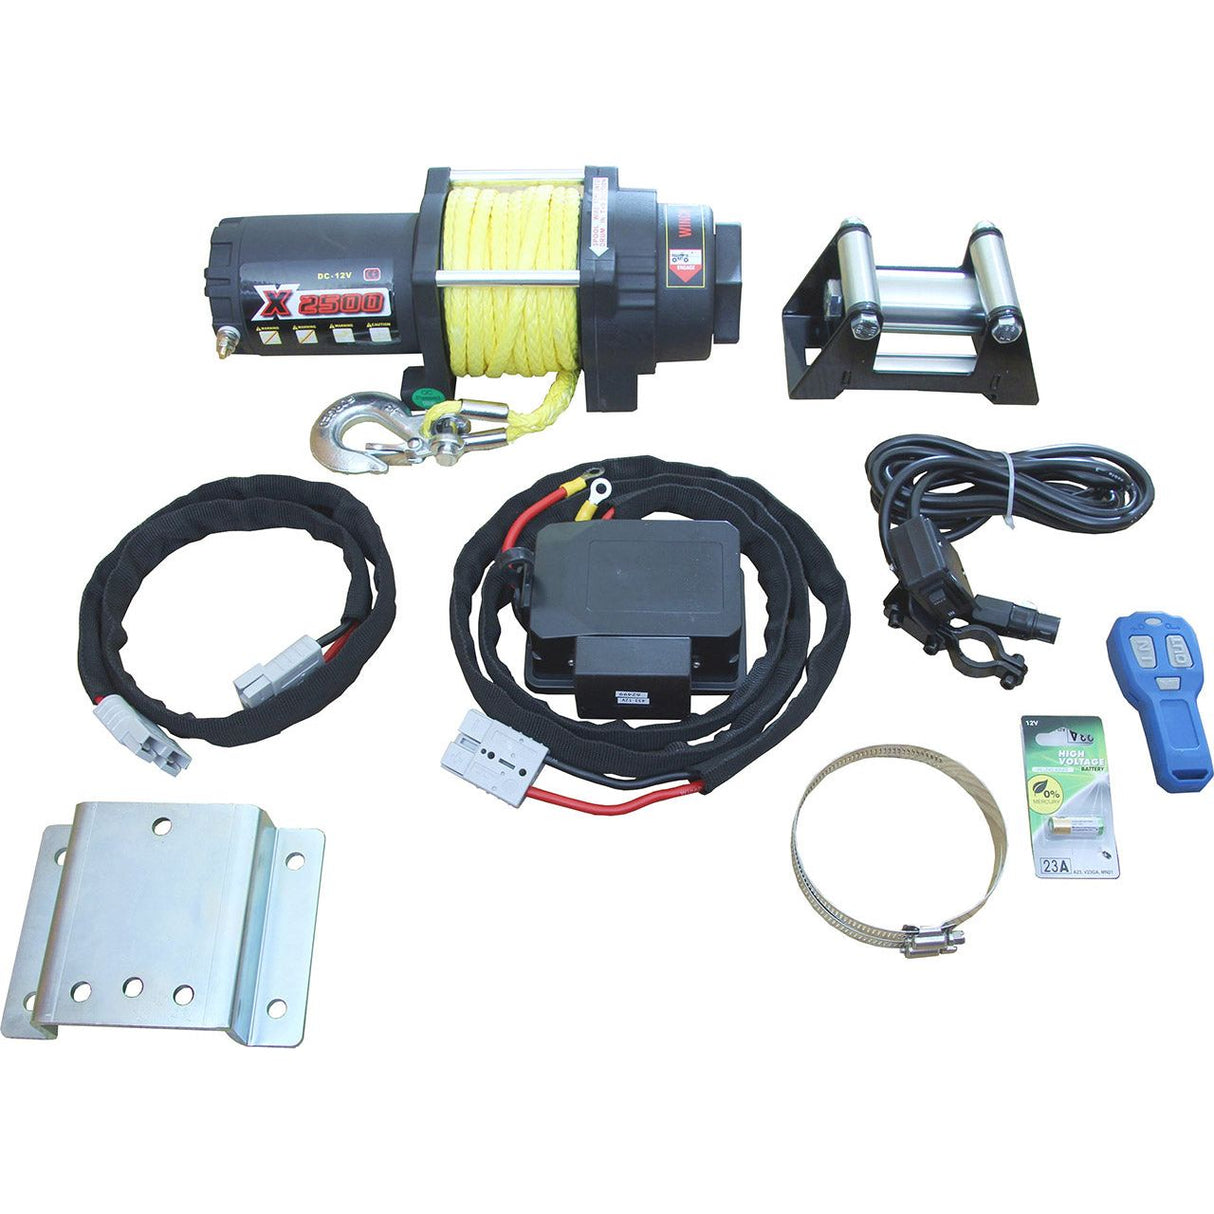 IB Remote Controlled Winch X2500S for timber wagon/ATV Winch